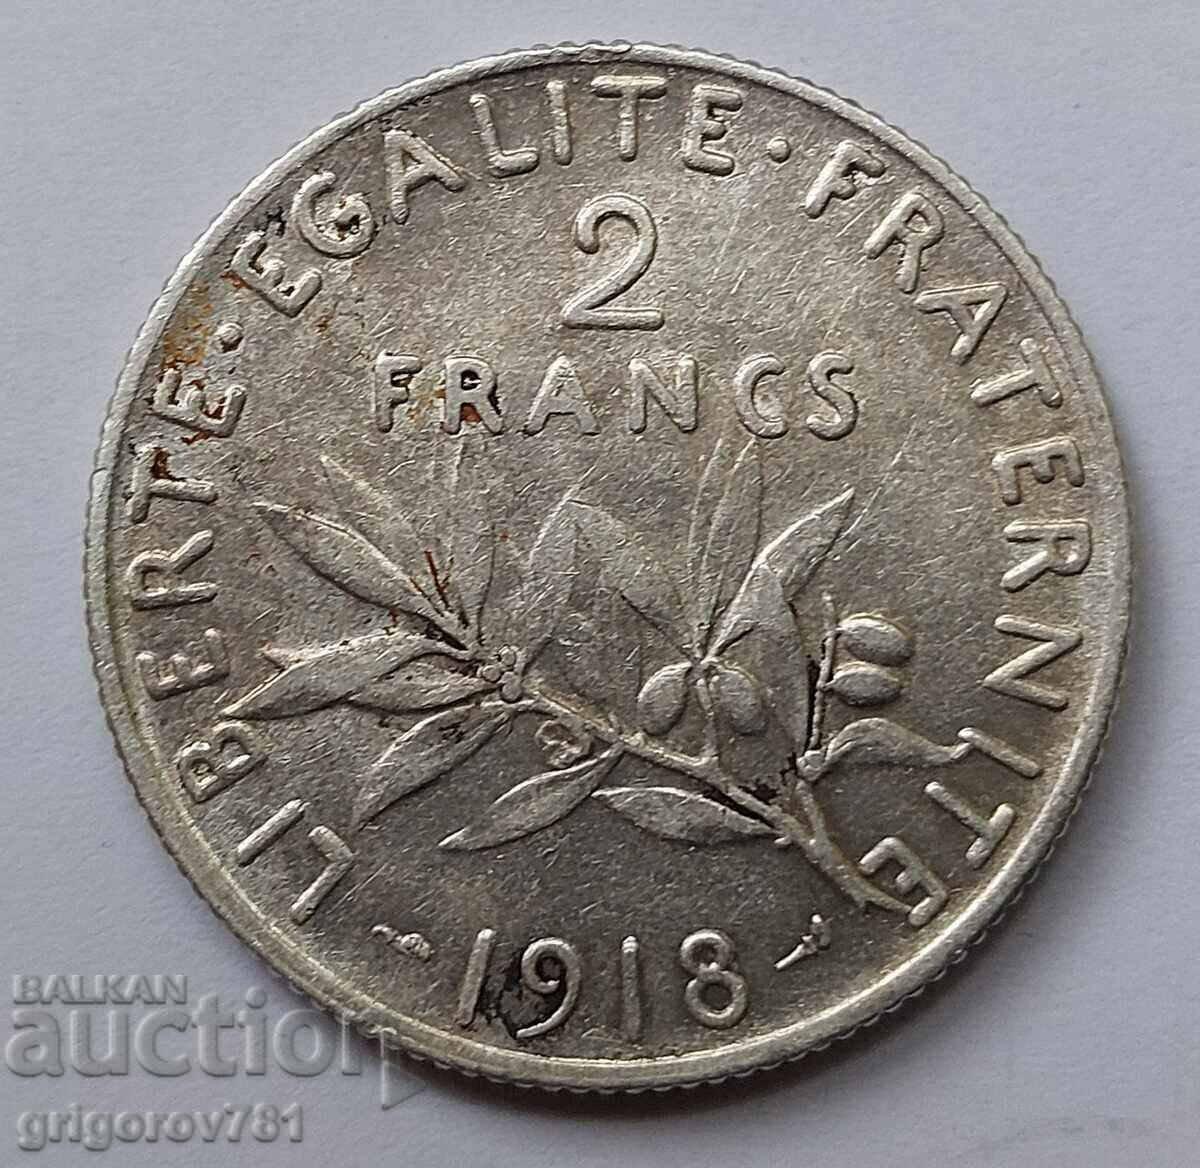 2 Francs Silver France 1912 - Silver Coin #39